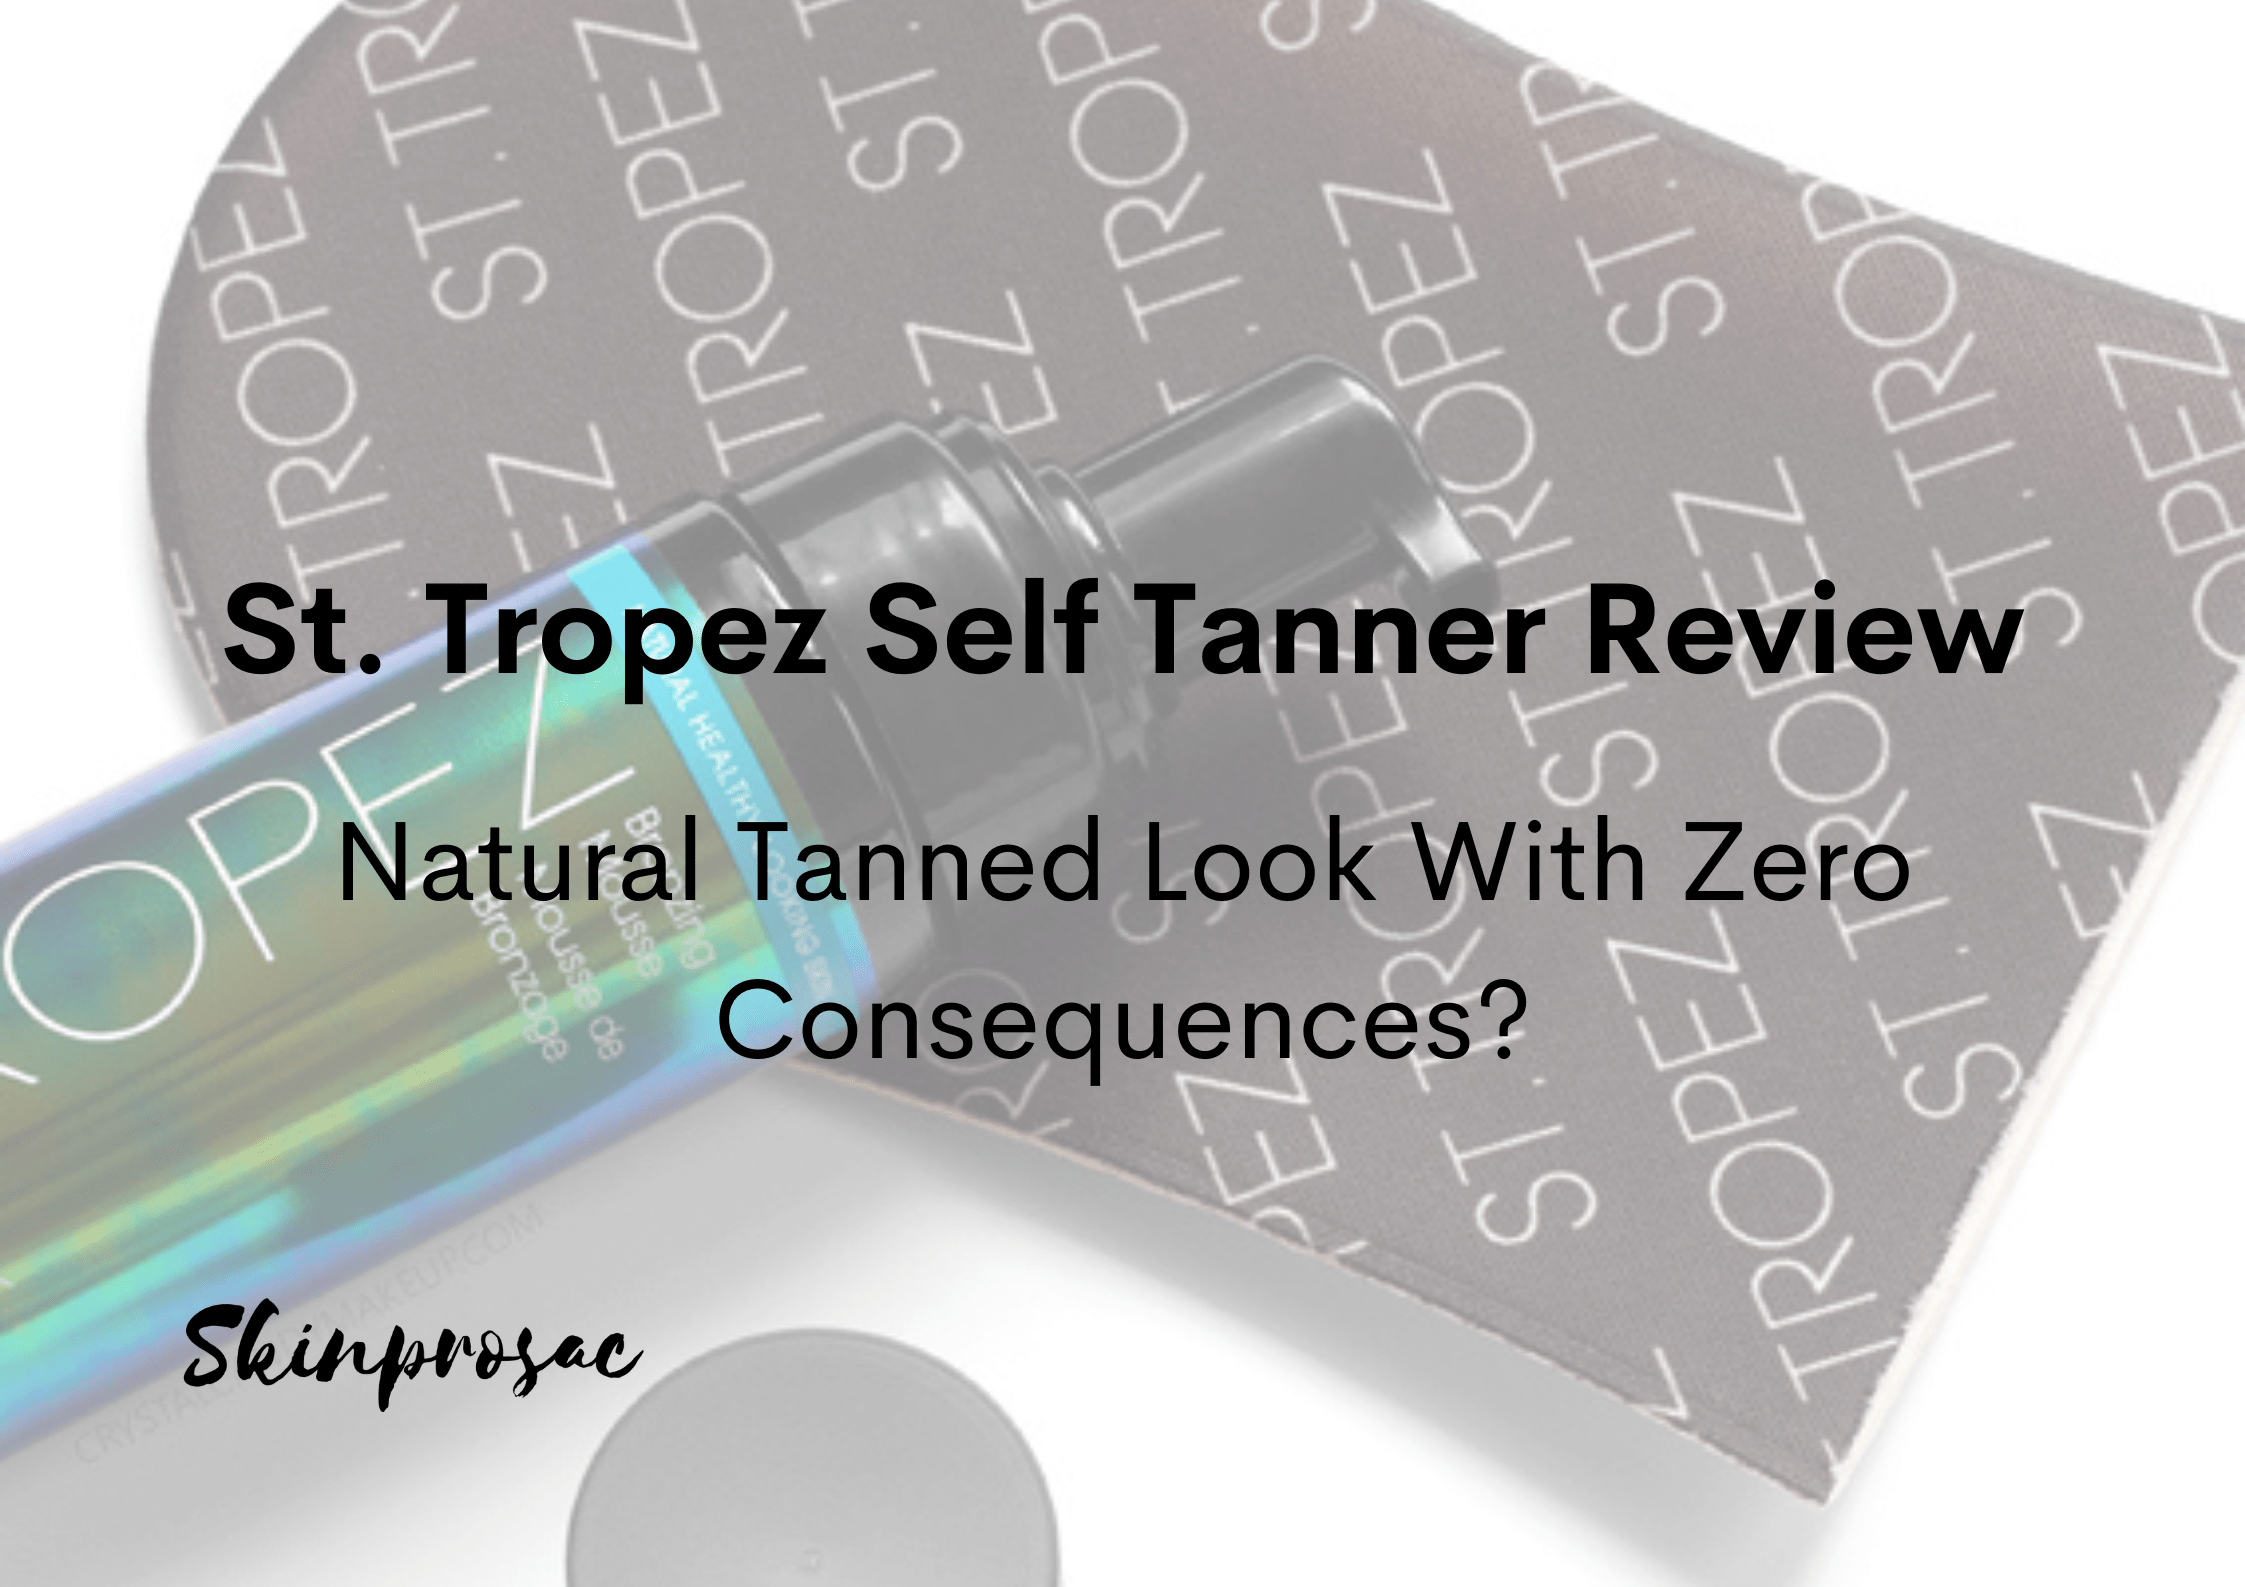 St. Tropez Self Tanner Review